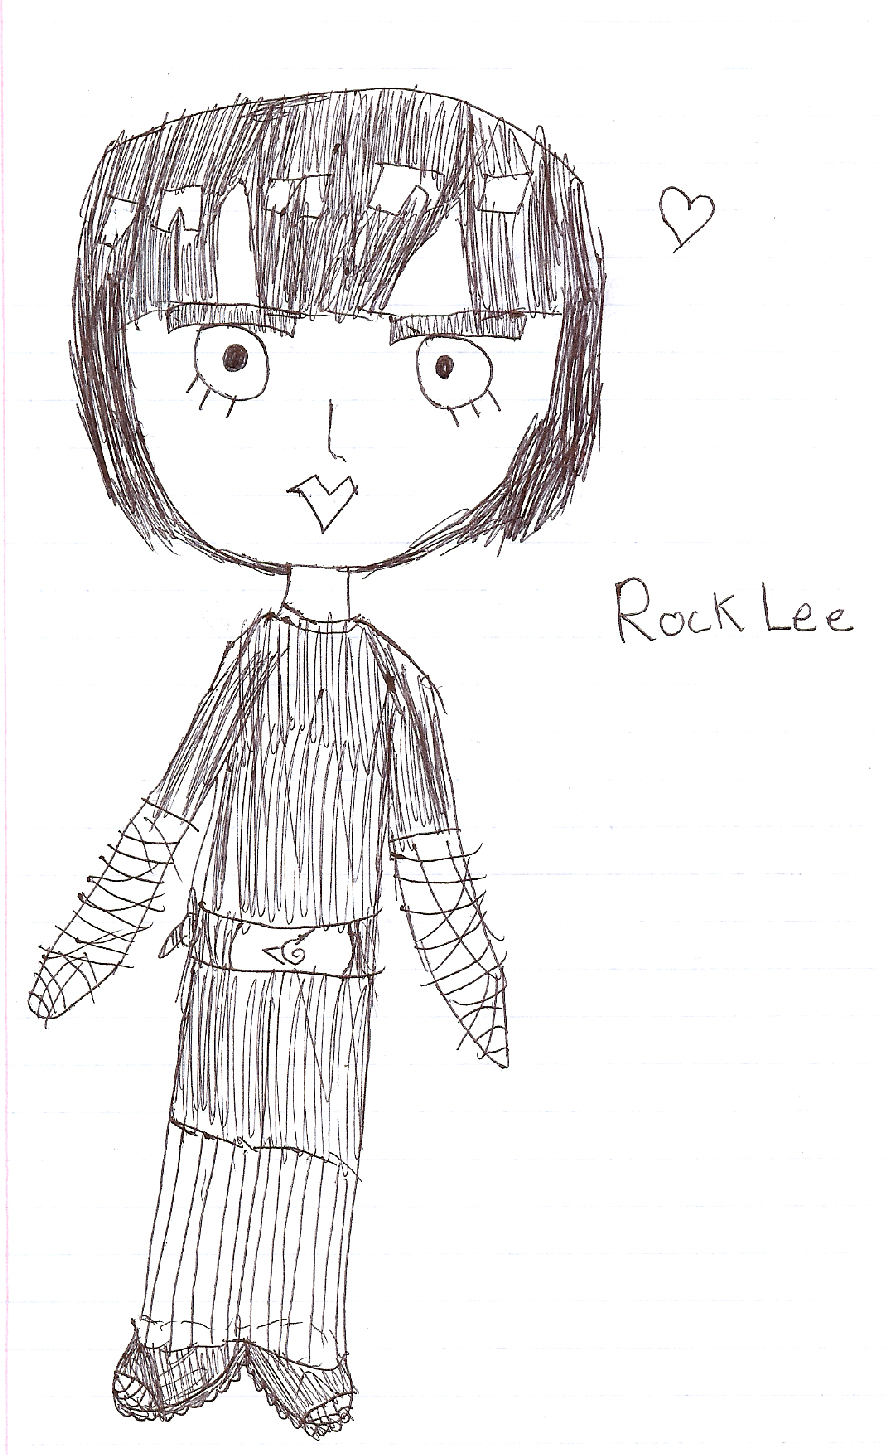 First Attempt At Rock Lee by Mewtwo13